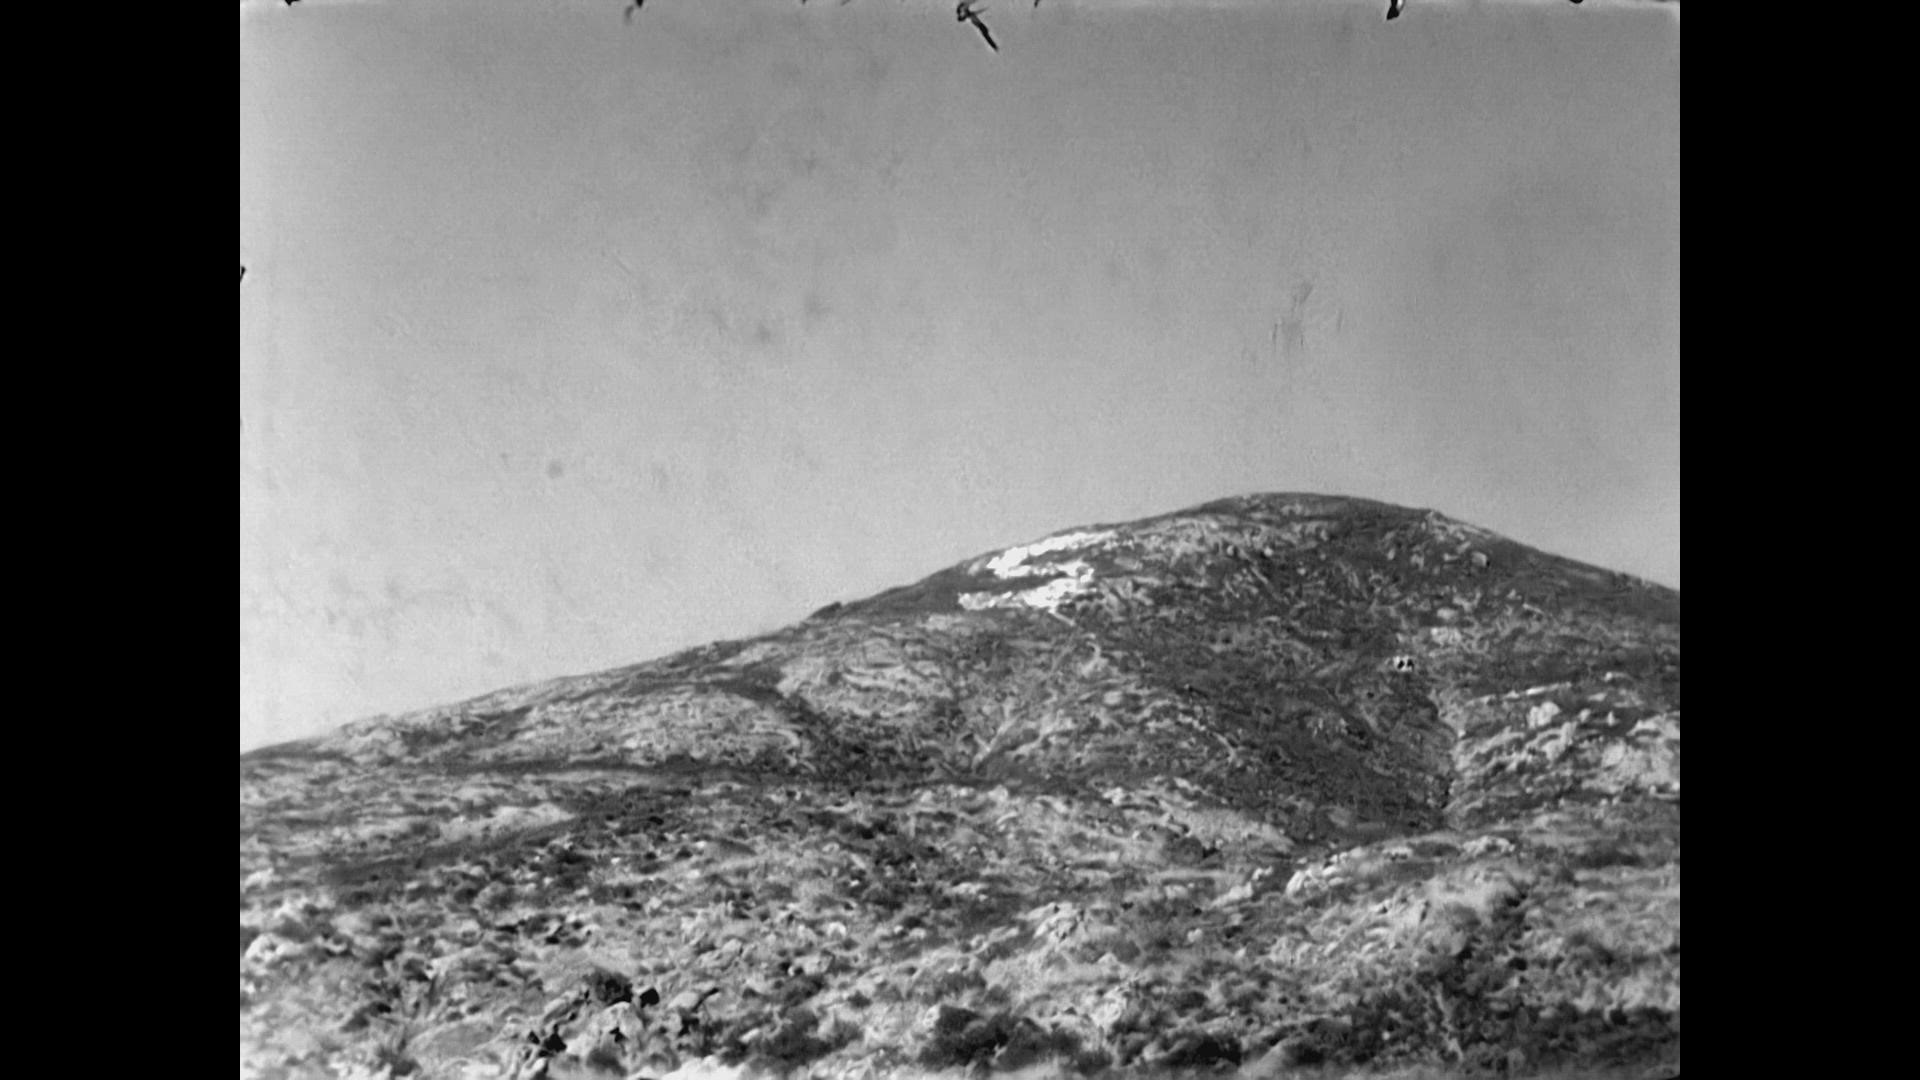 An SDSU homecoming tradition that started in 1931, was captured by CBS 8 in 1958 when students climbed Cowles Mountain to paint a giant "S" visible for miles around.